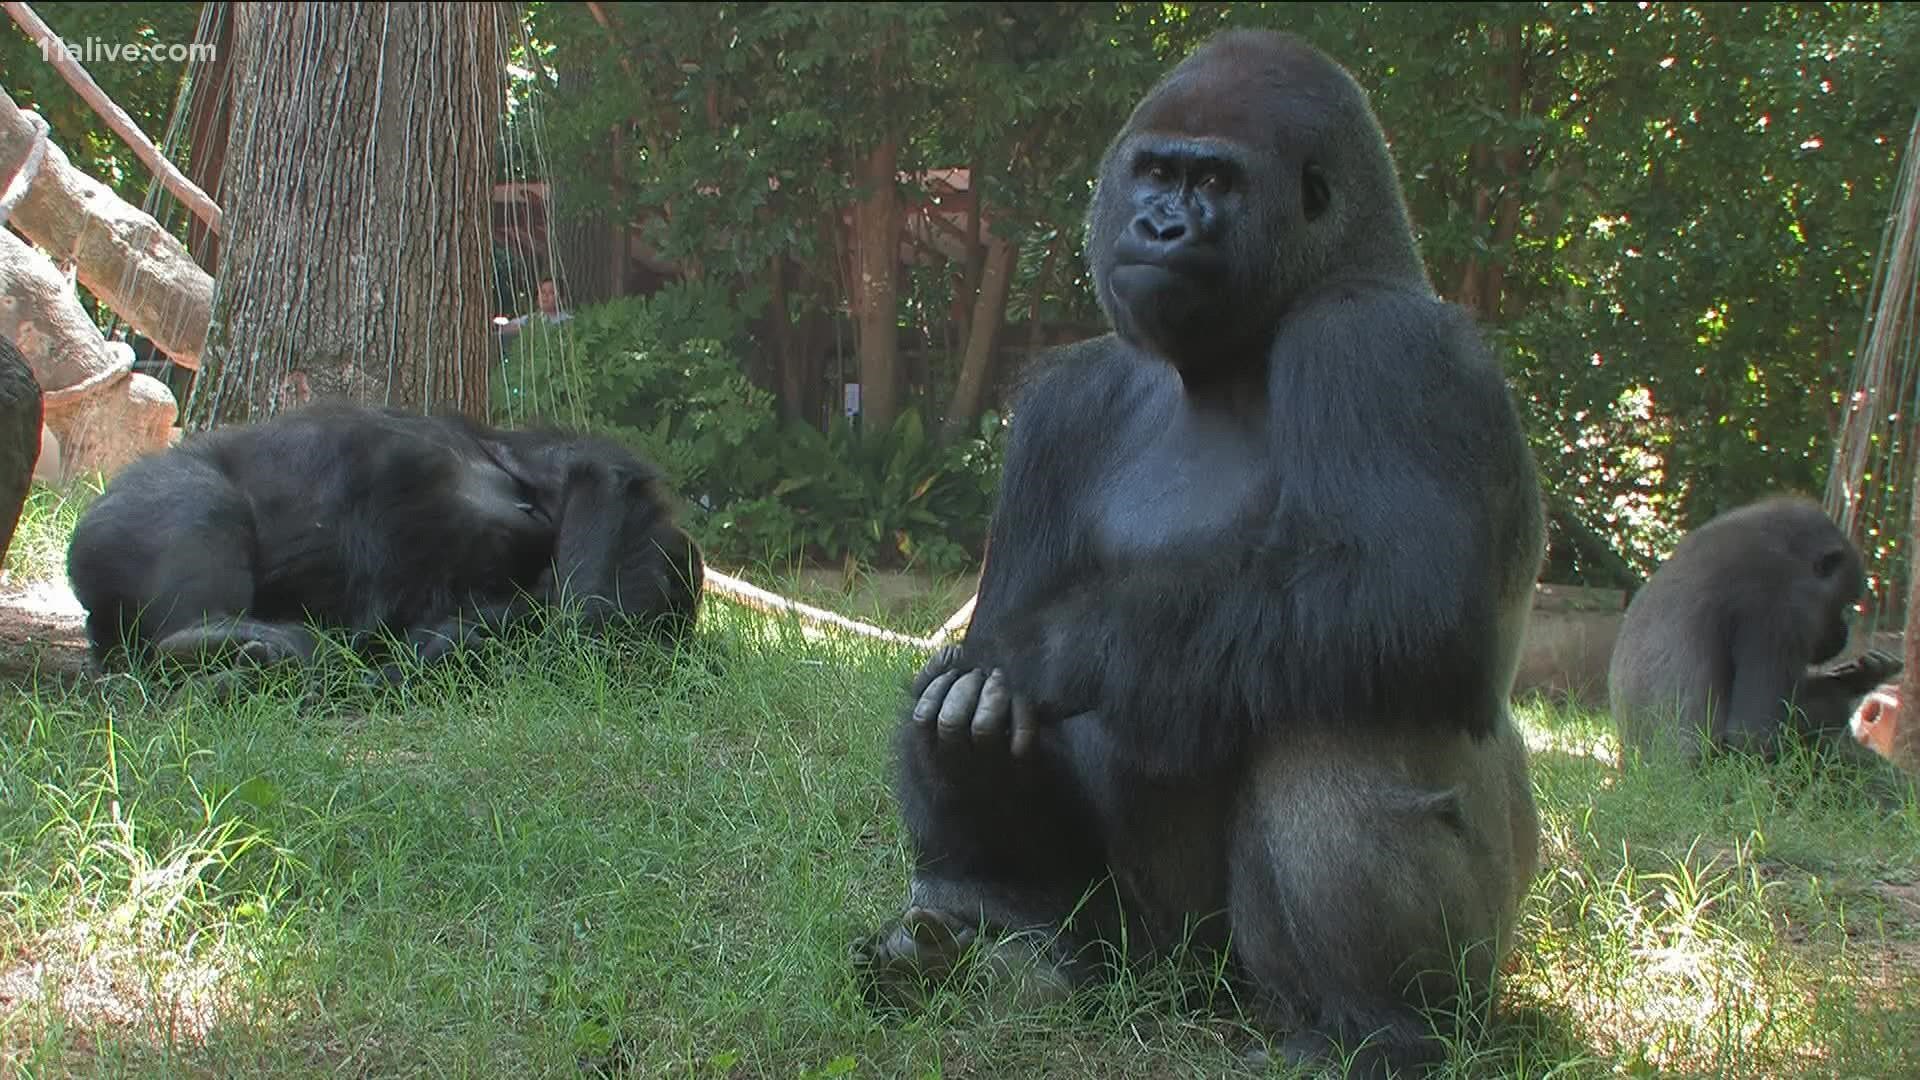 Zoo Atlanta confirmed the news Friday about an outbreak of the virus there.